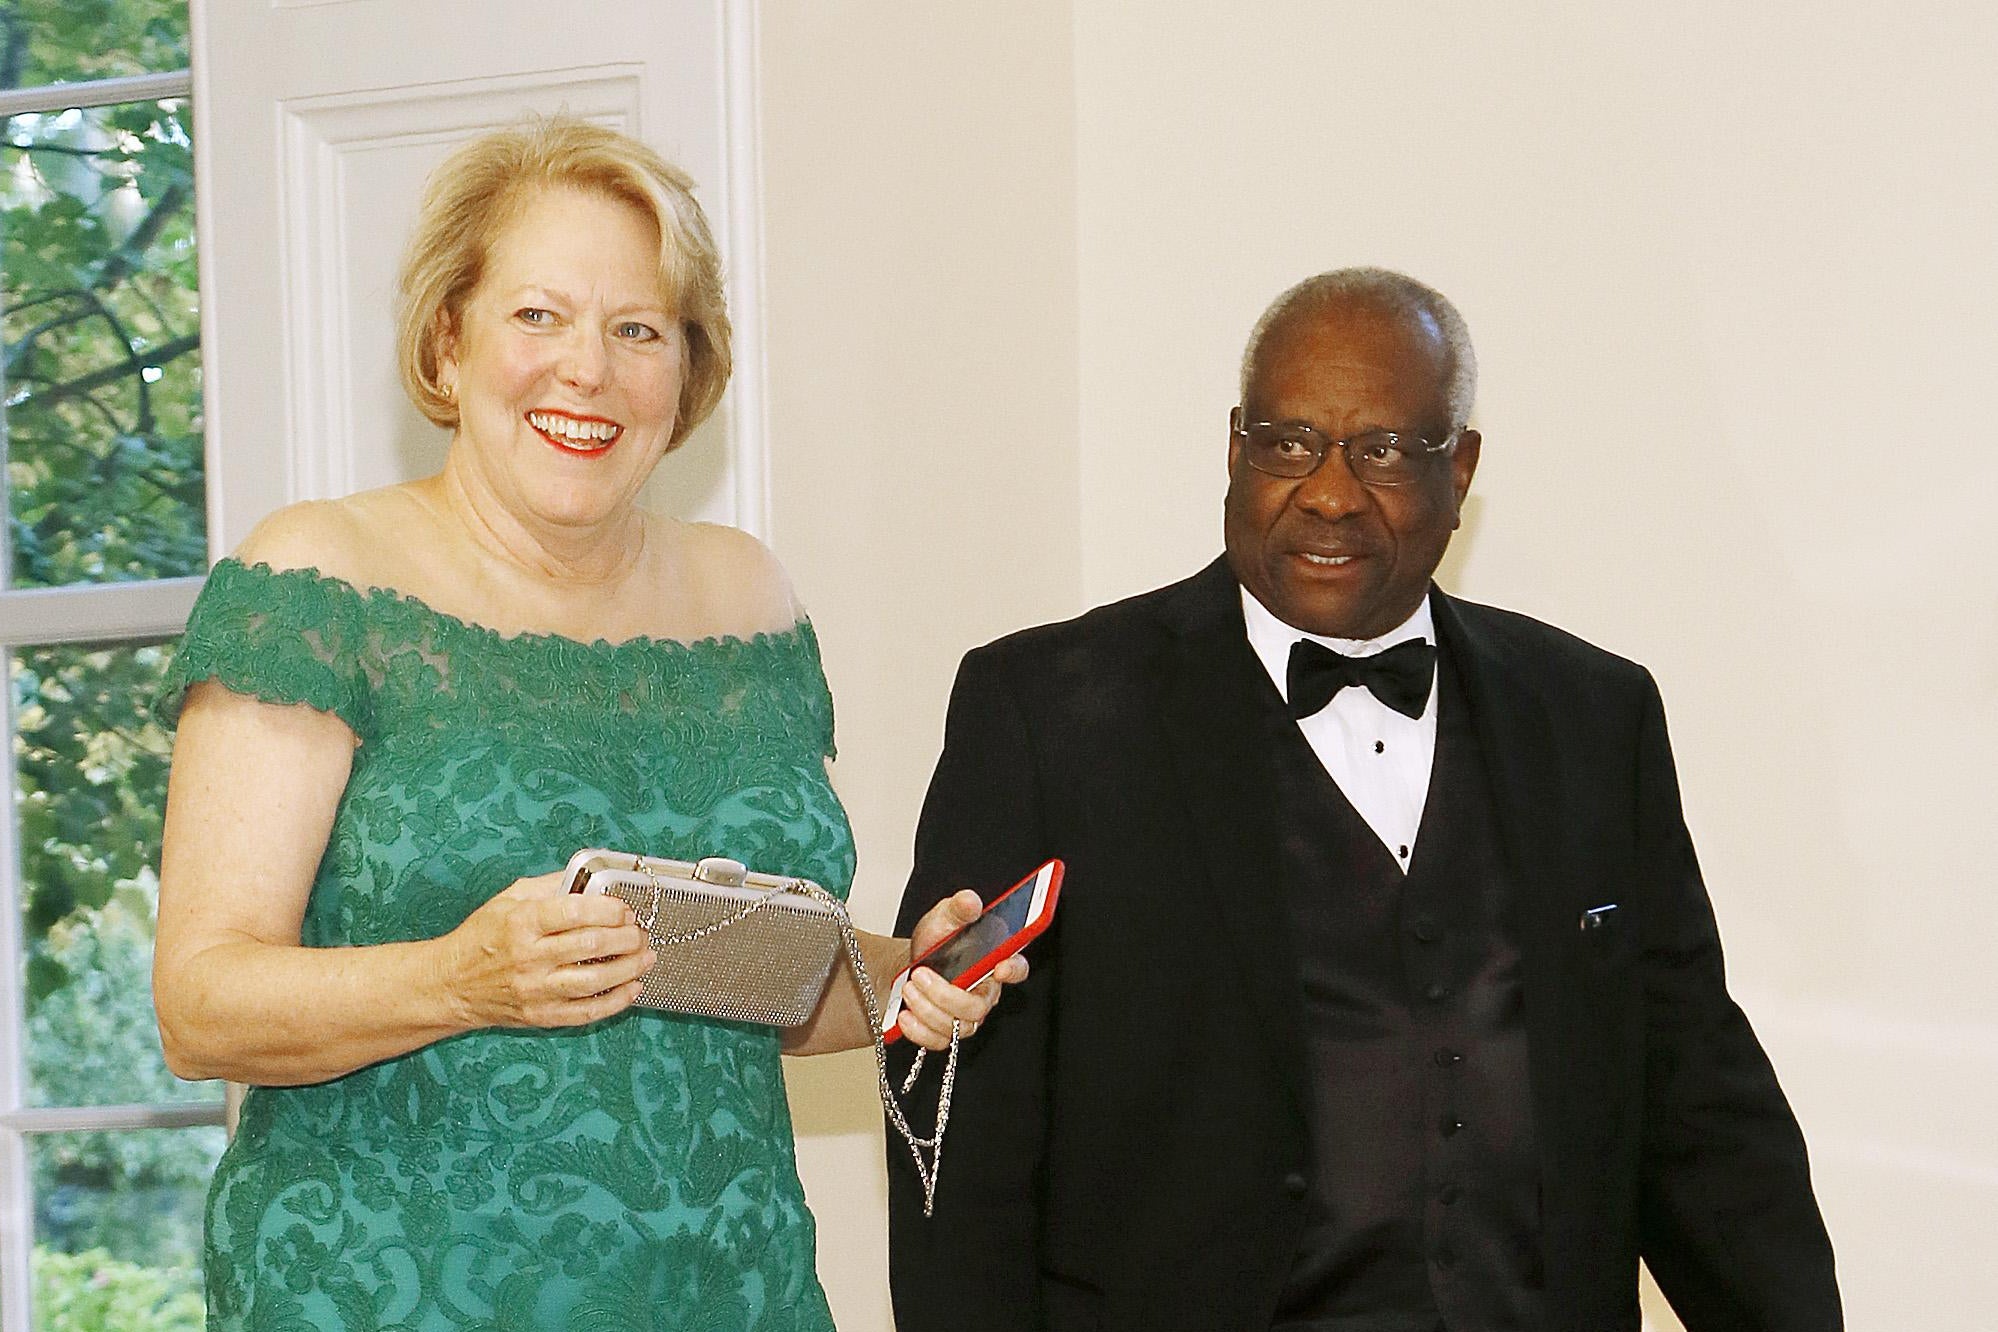 Clarence in a tux, Ginni smiling in a green gown